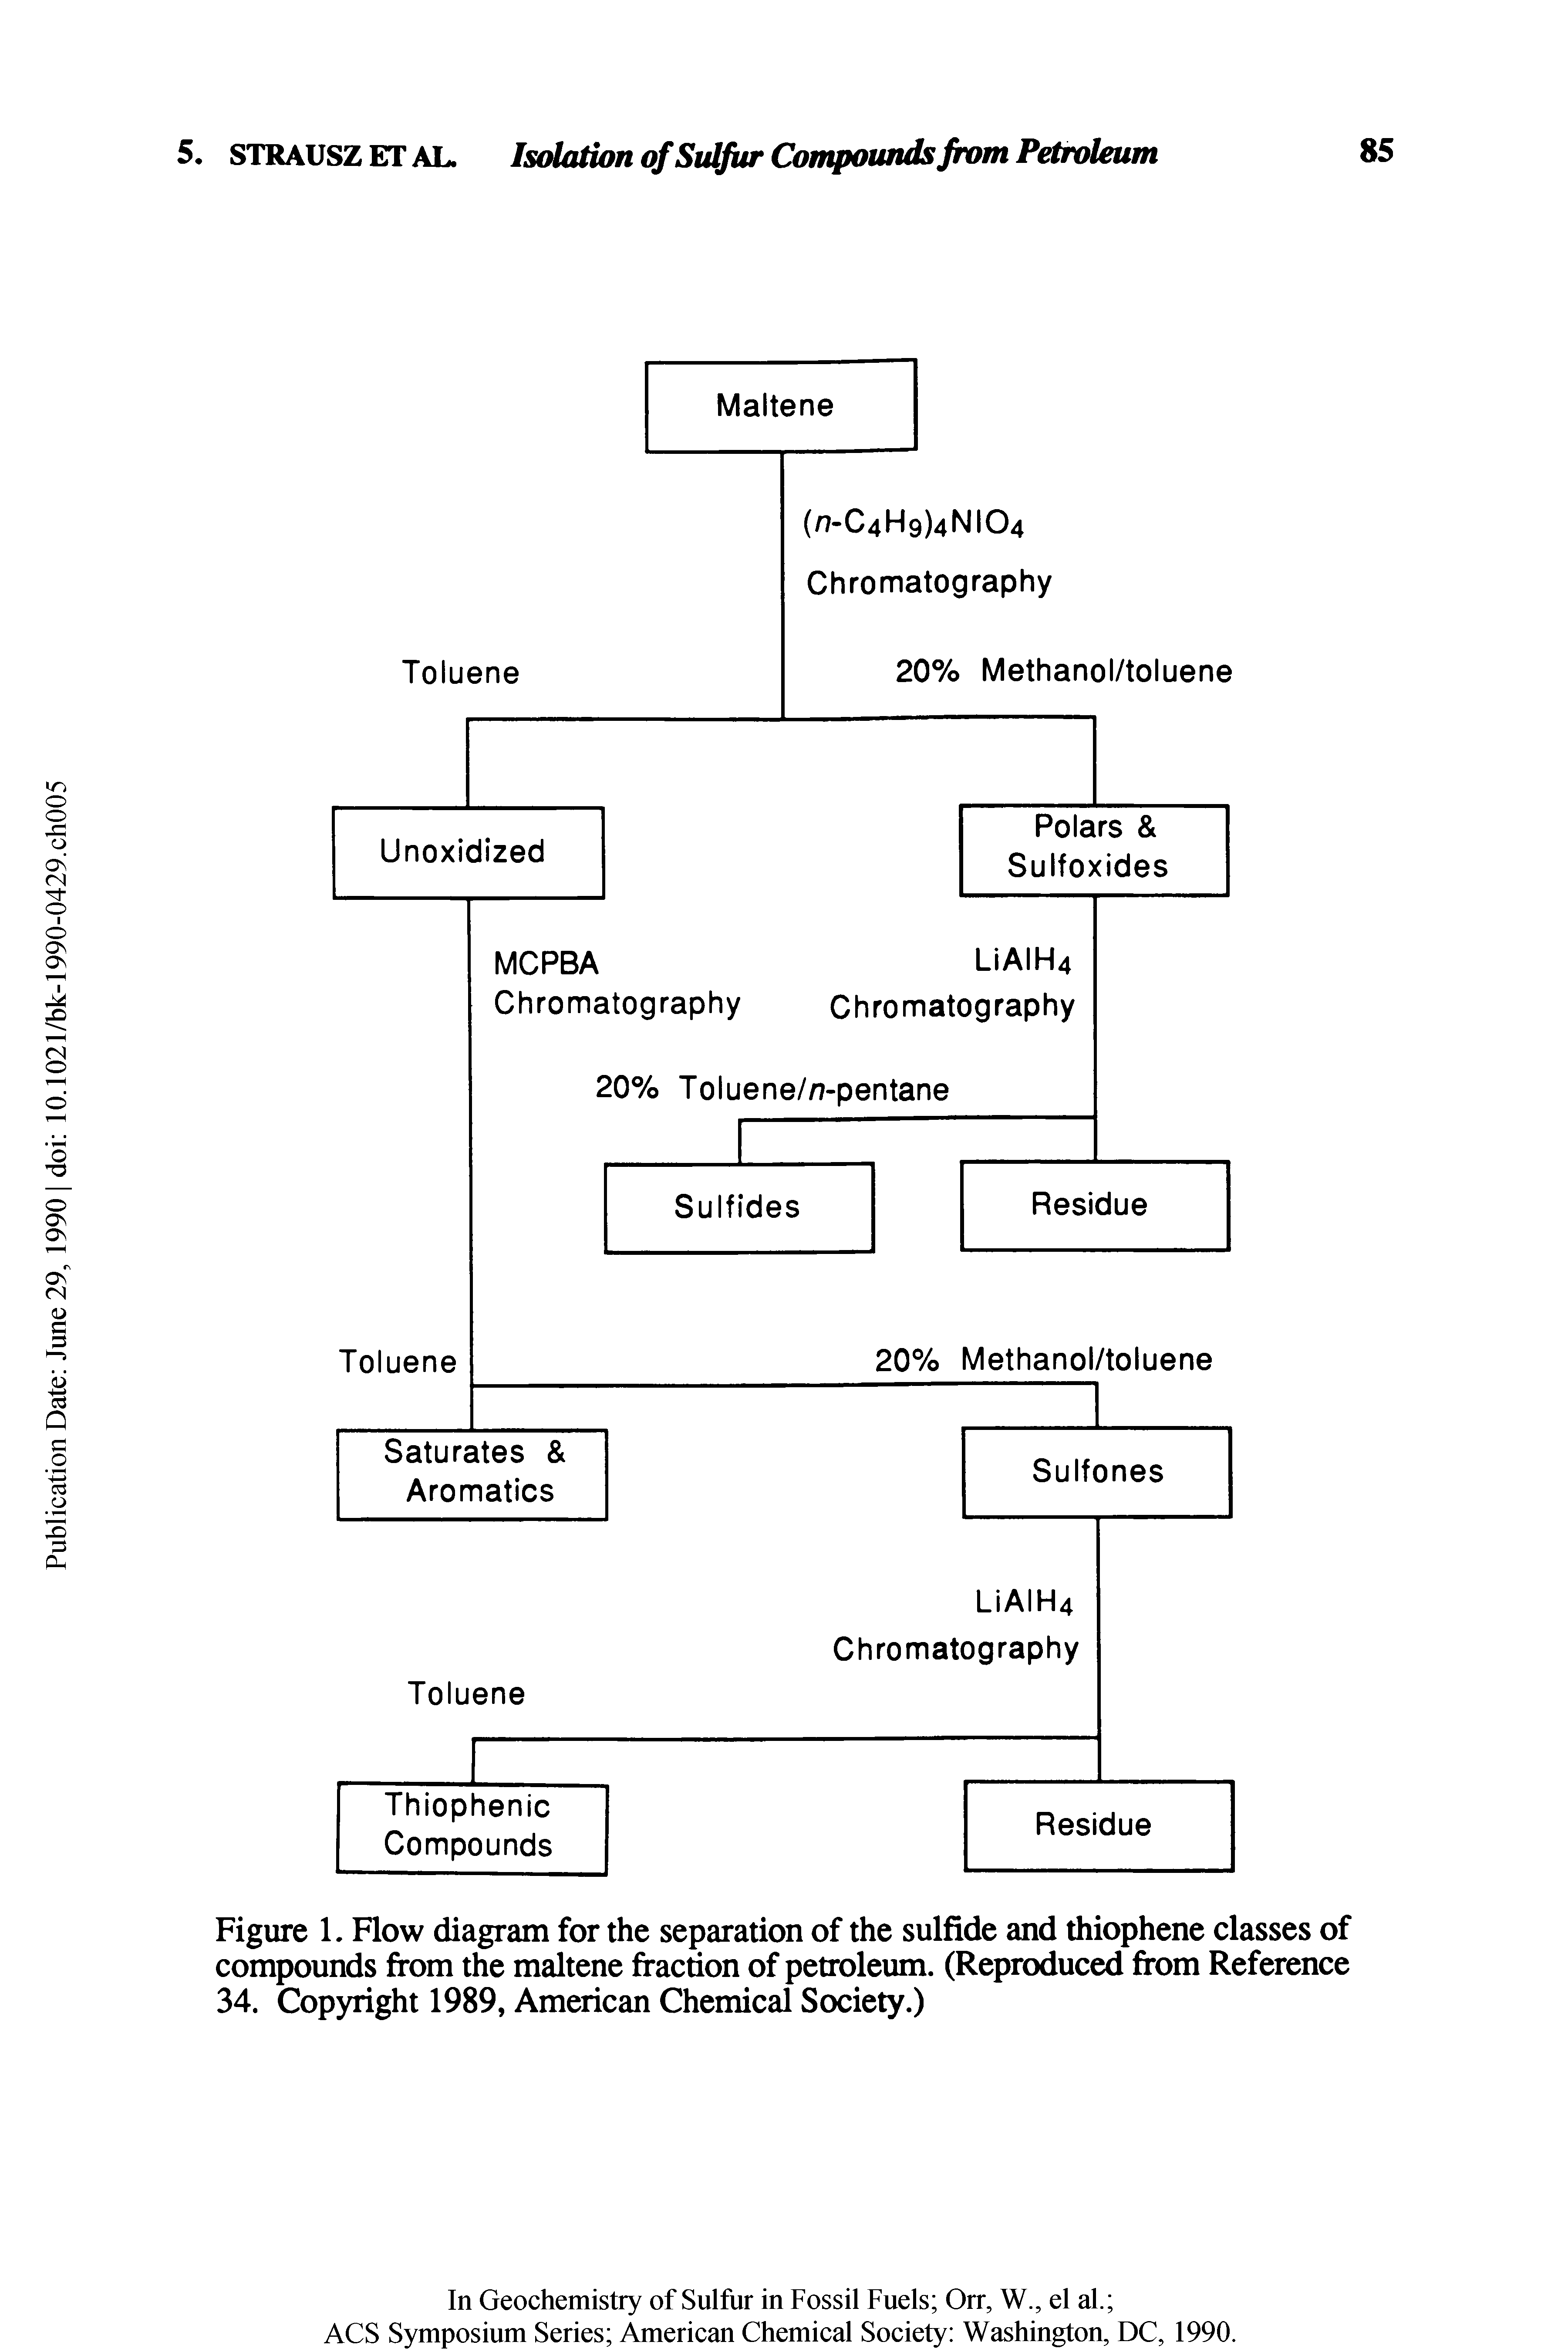 Figure 1. Flow diagram for the separation of the sulfide and thiophene classes of compounds from the maltene fraction of petroleum. (Reproduced from Reference 34. Copyright 1989, American Chemical Society.)...